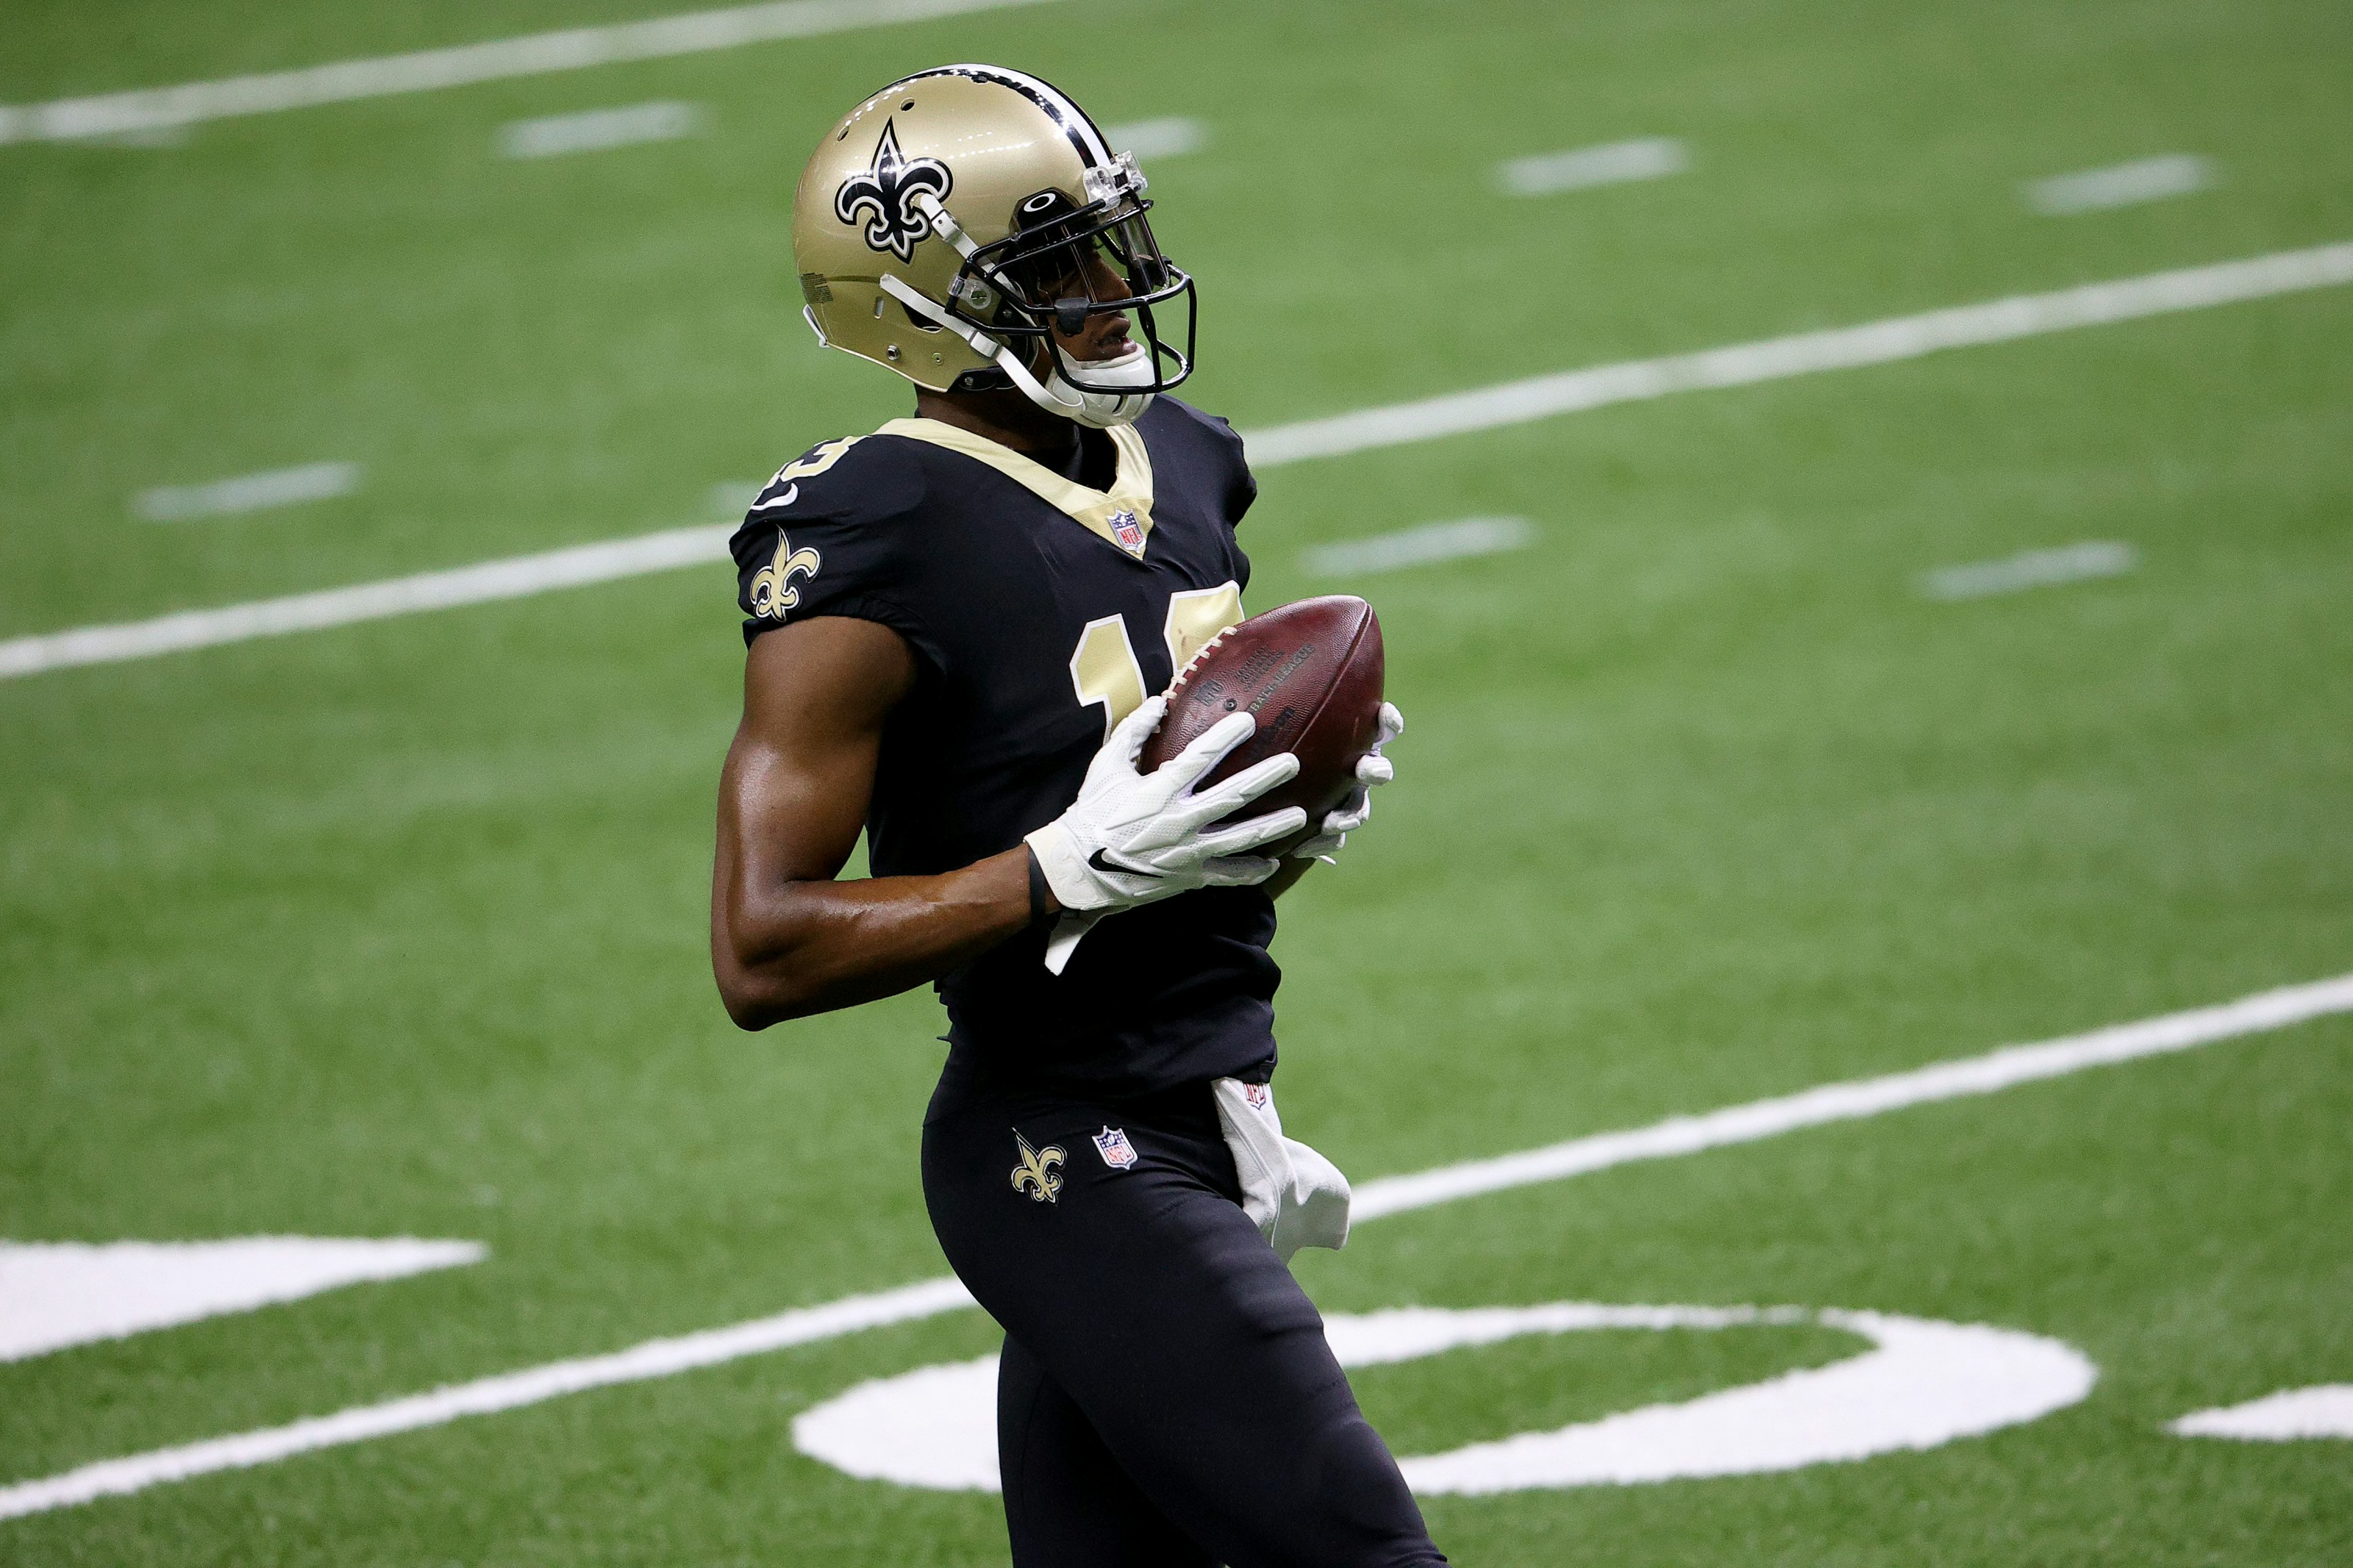 5 NFL players returning from injury who could star in the 2022 season